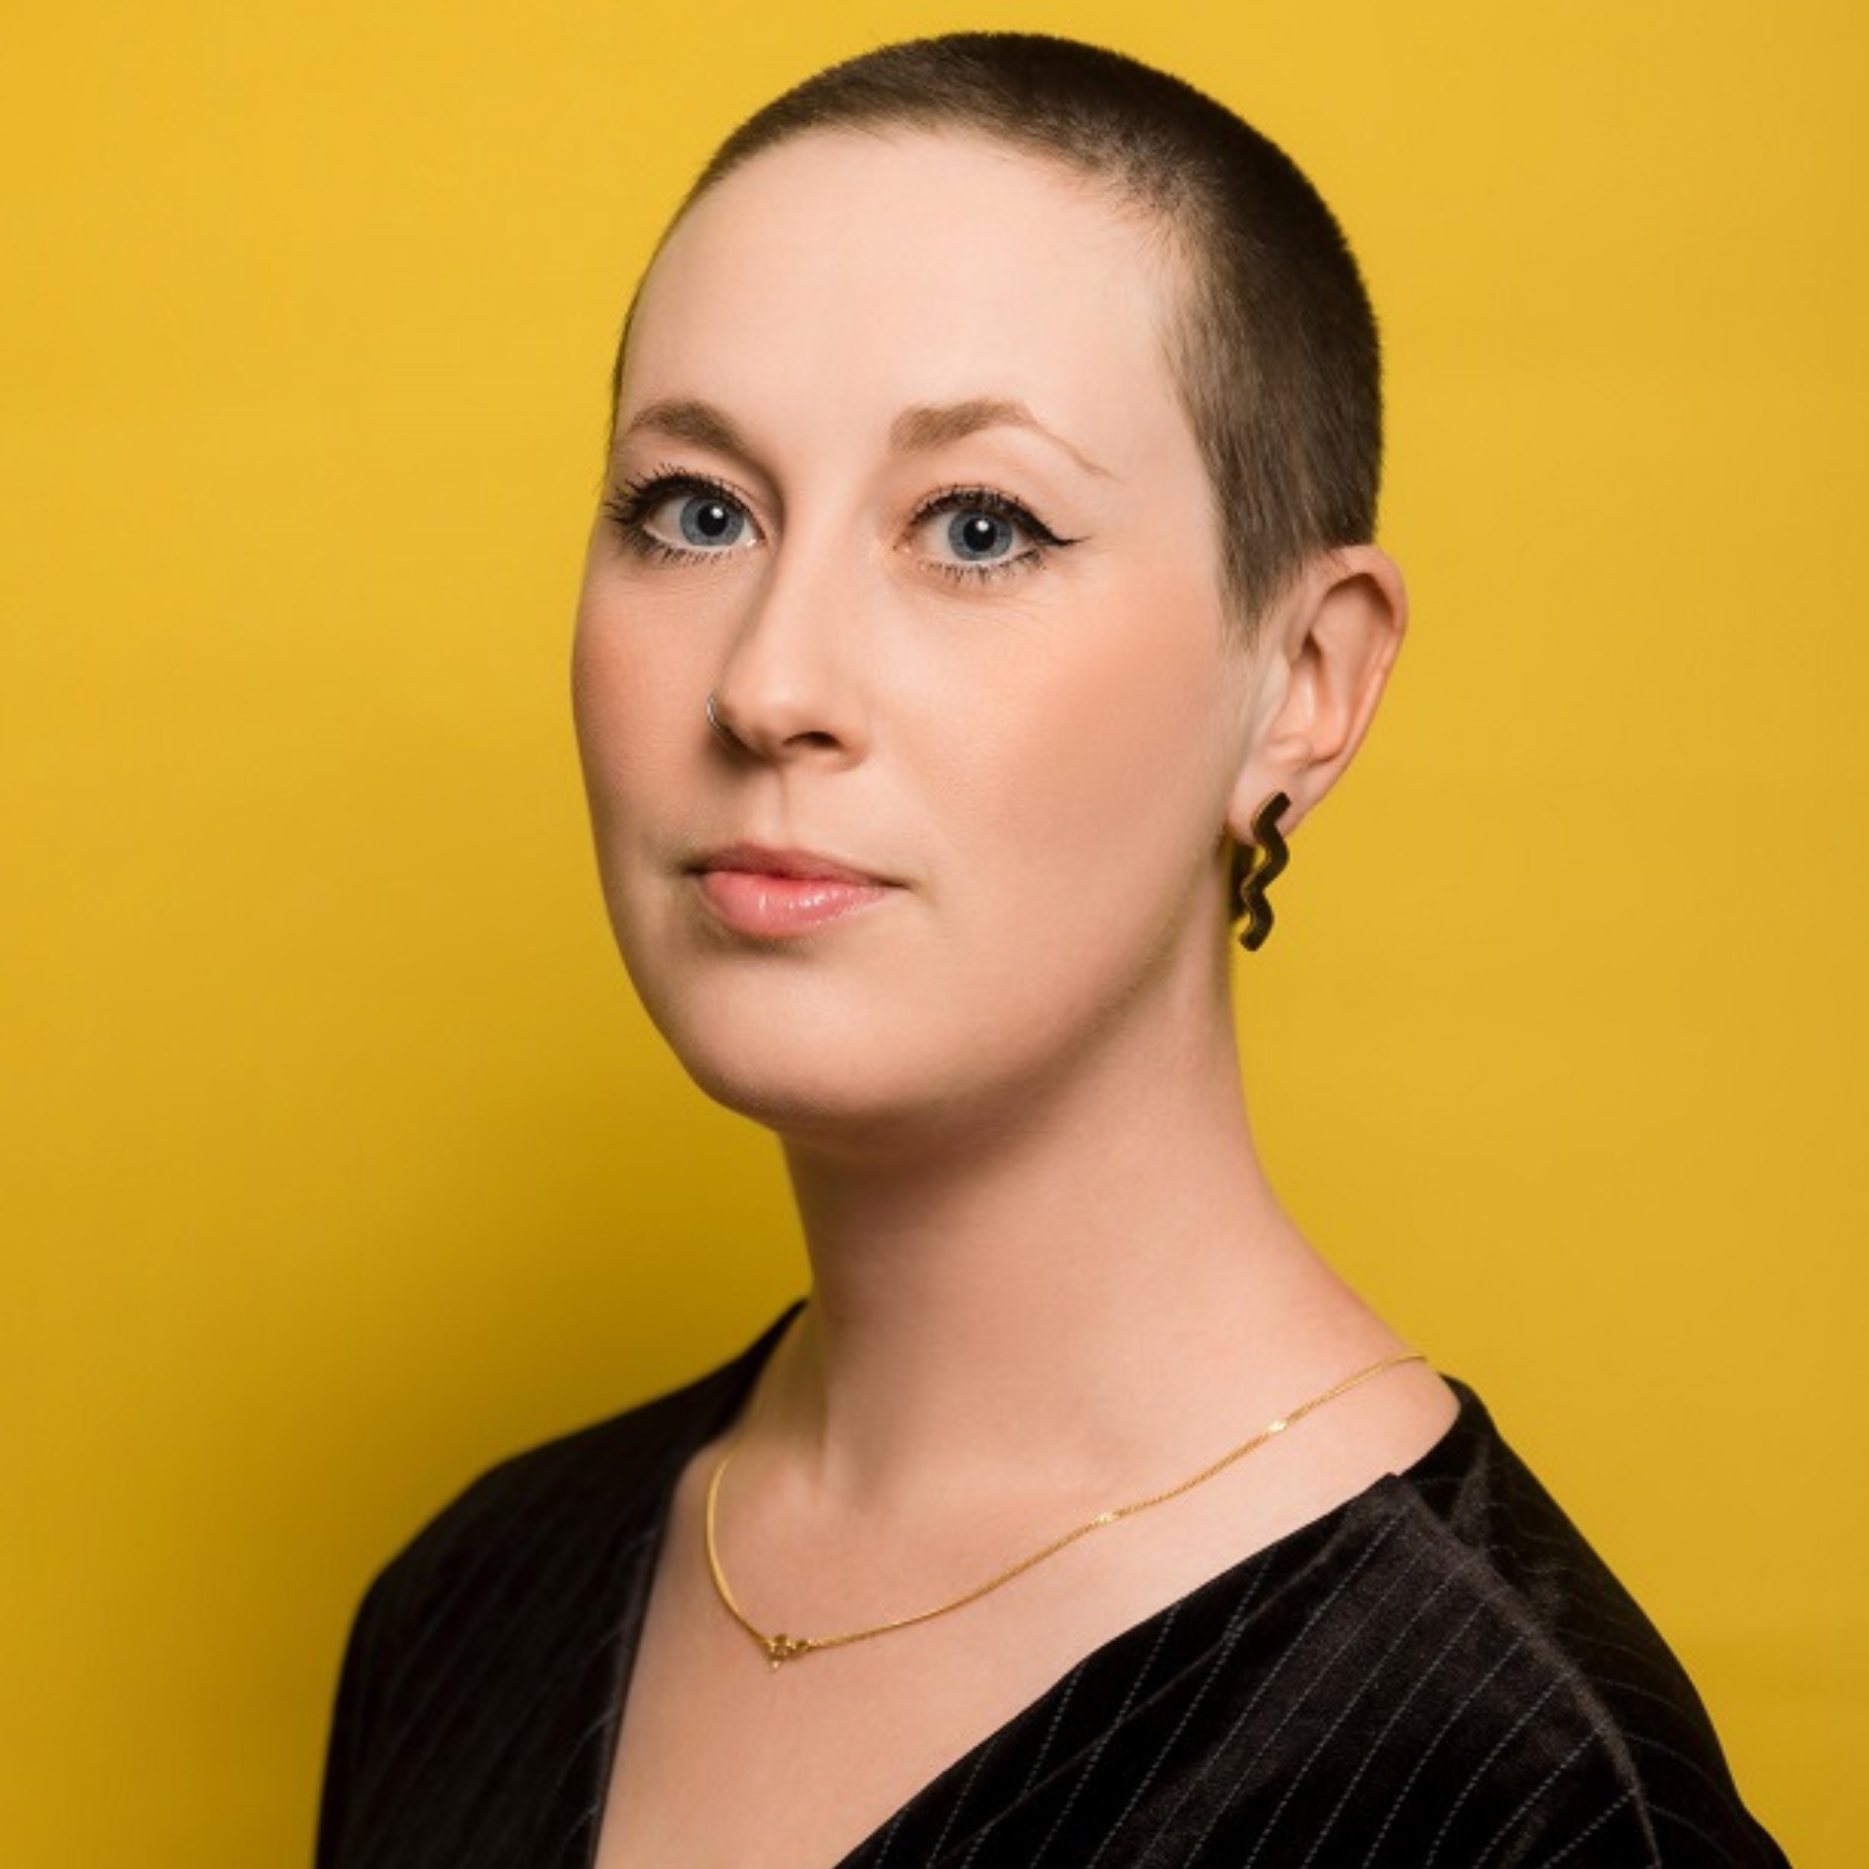 Zoë Programme Manager at Pie Factory Music. Woman with short close shaved hair, with a black zig zag earring and wearing a black top. Yellow background